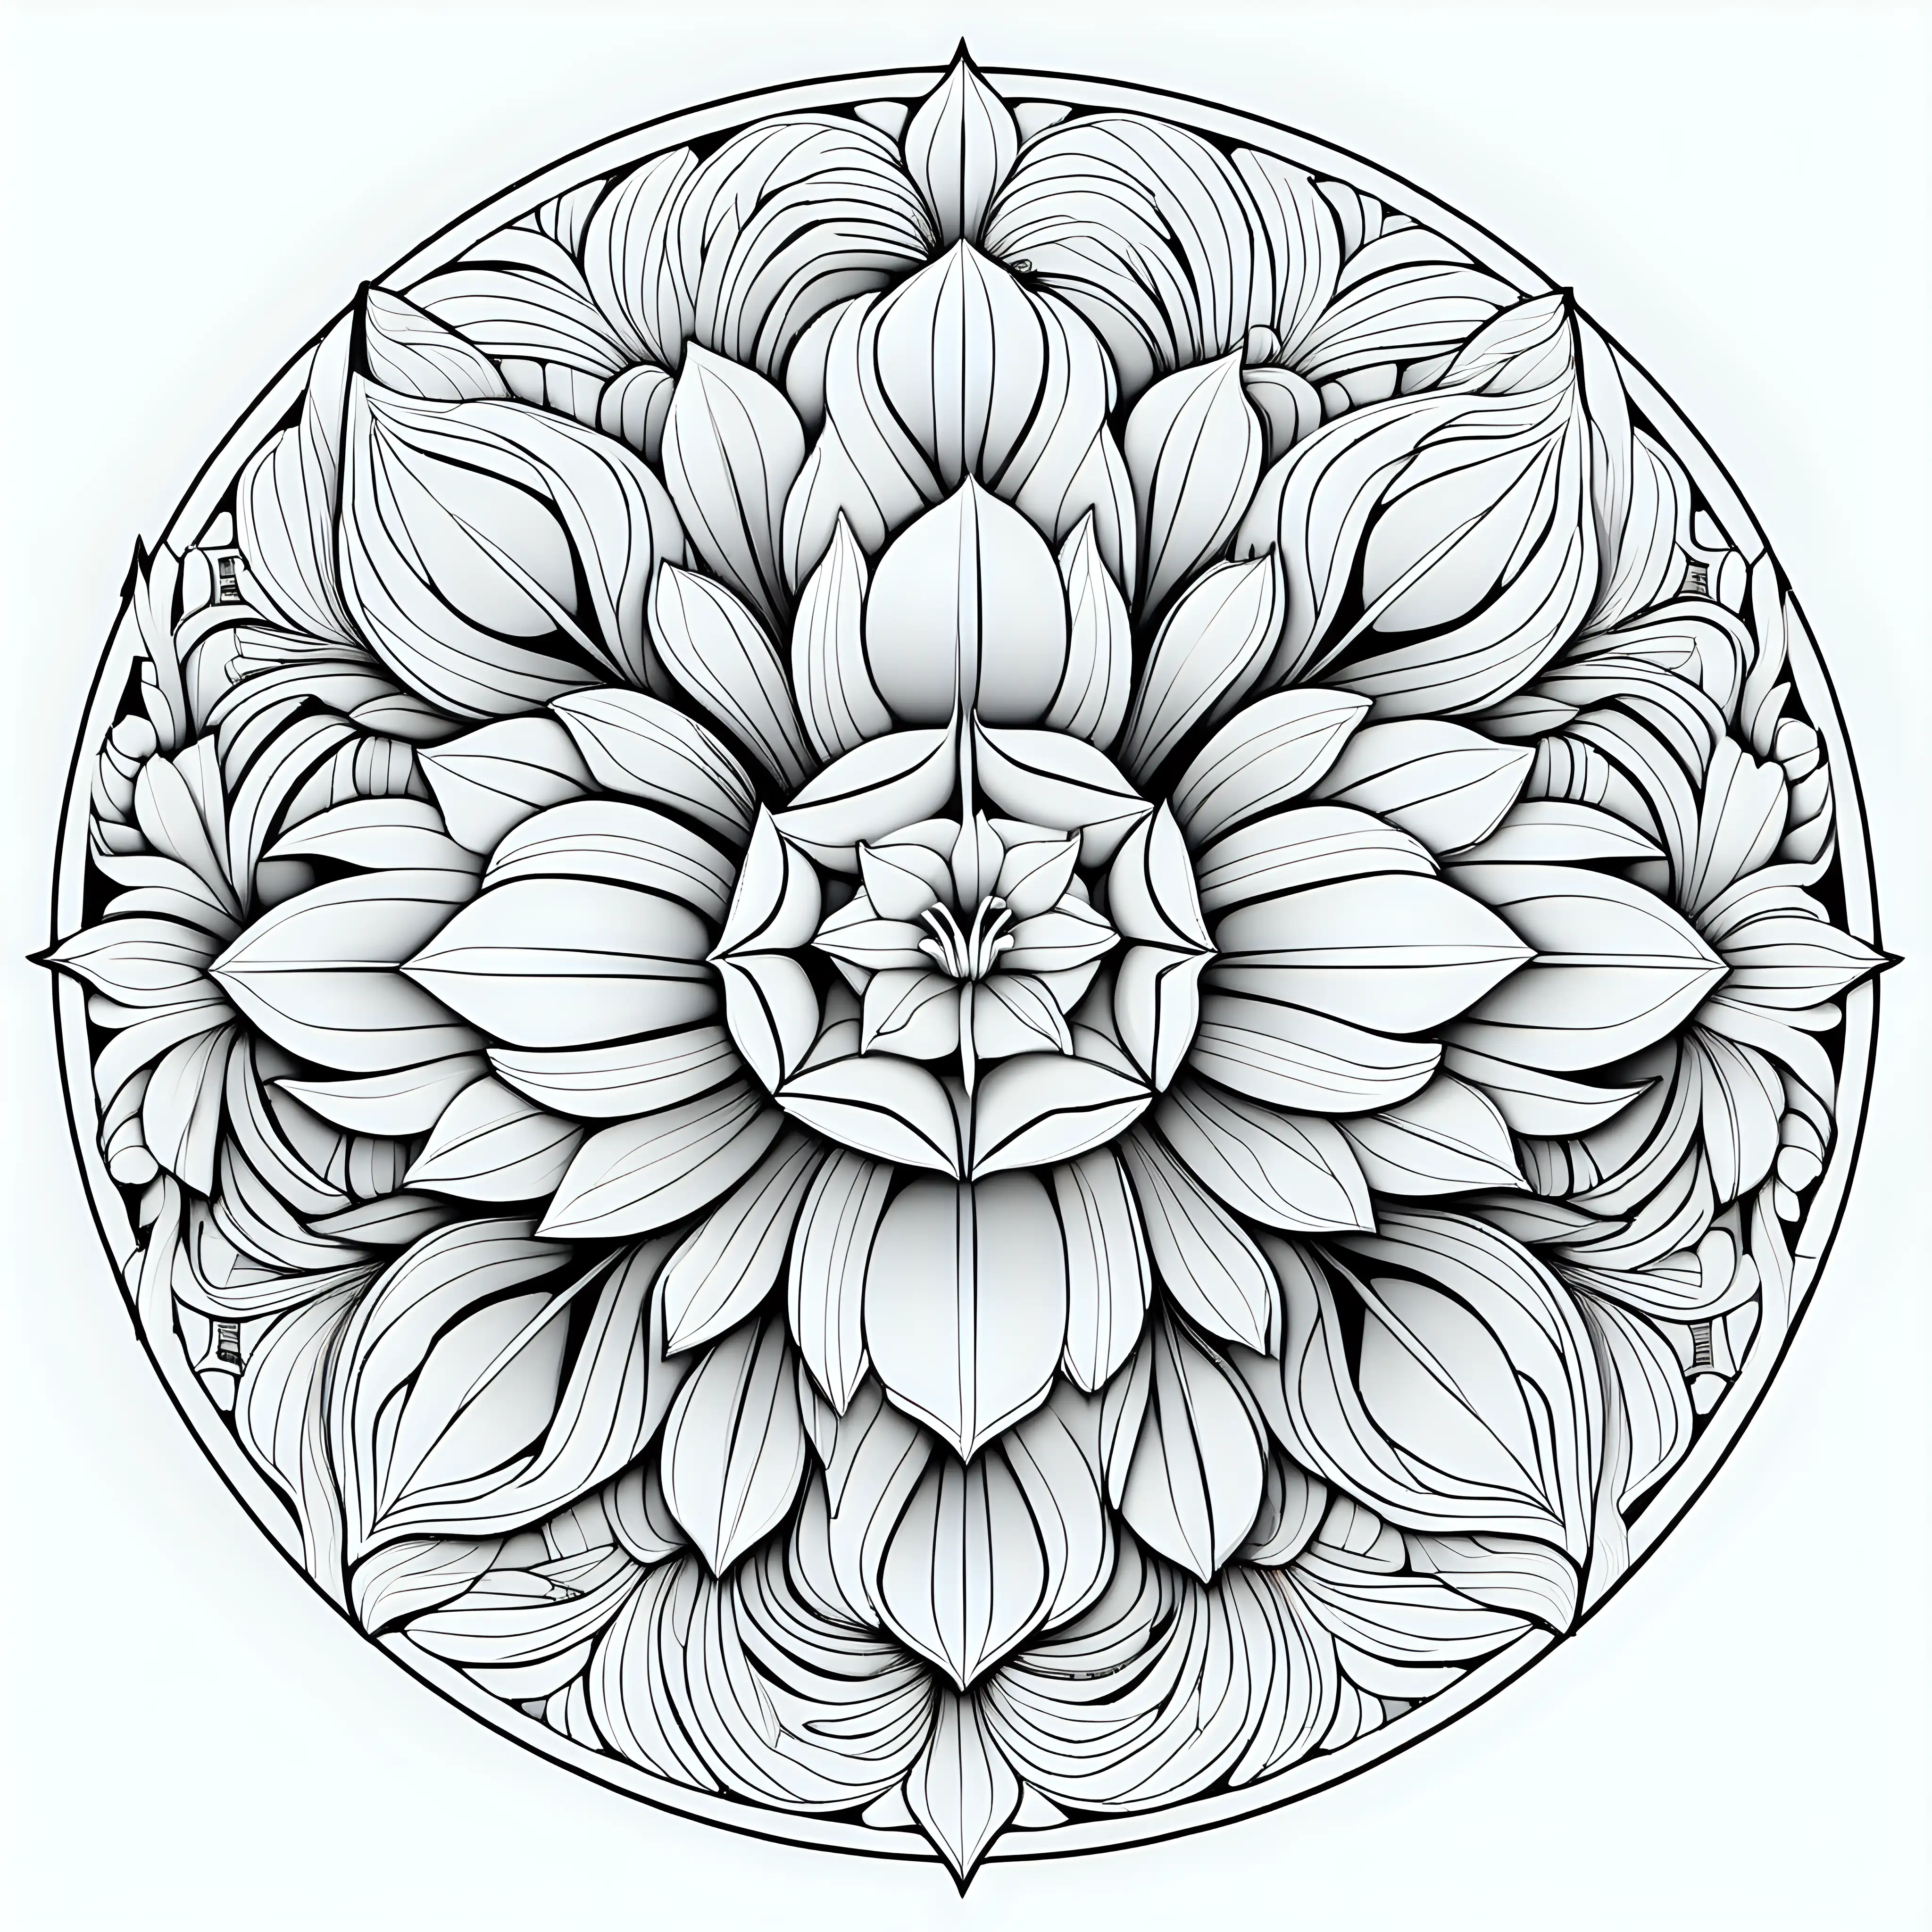 Coloring page with tulips in the center of a detailed and very defined 3d mandala on a white background, only black lines, no color